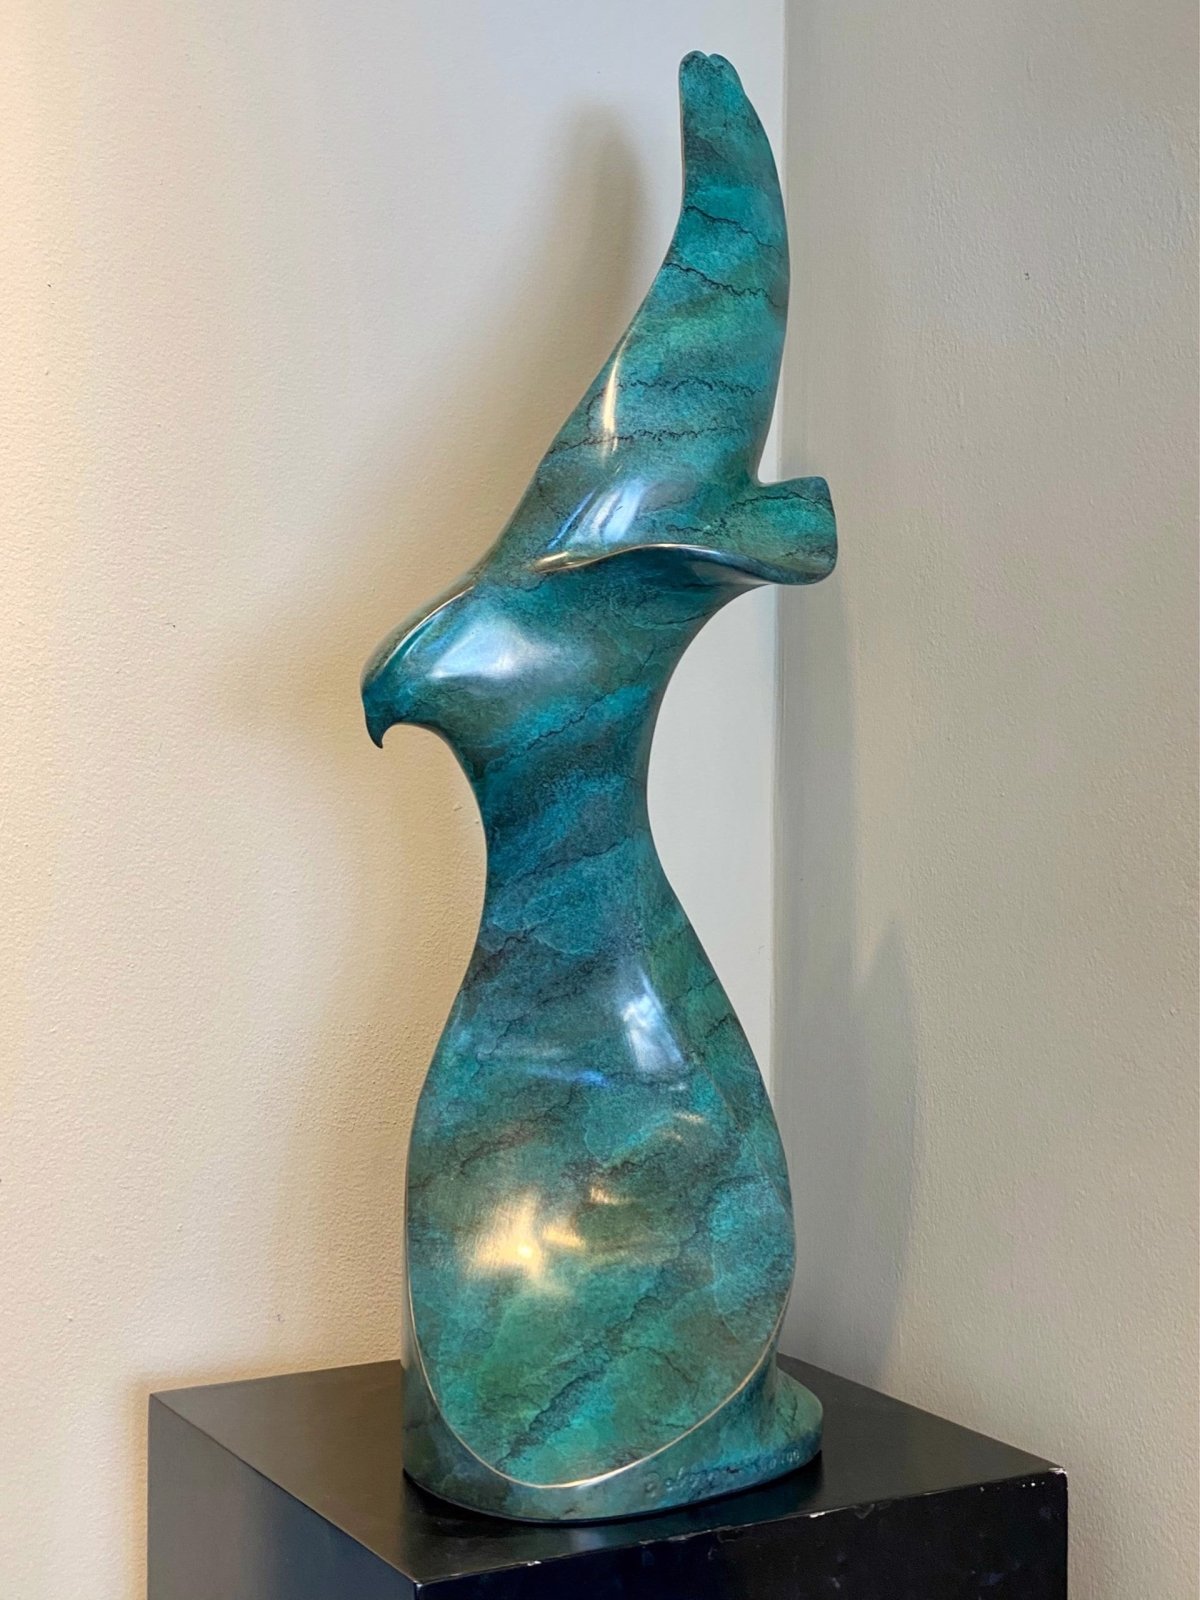 Soaring by Leo Osborne at LePrince Galleries